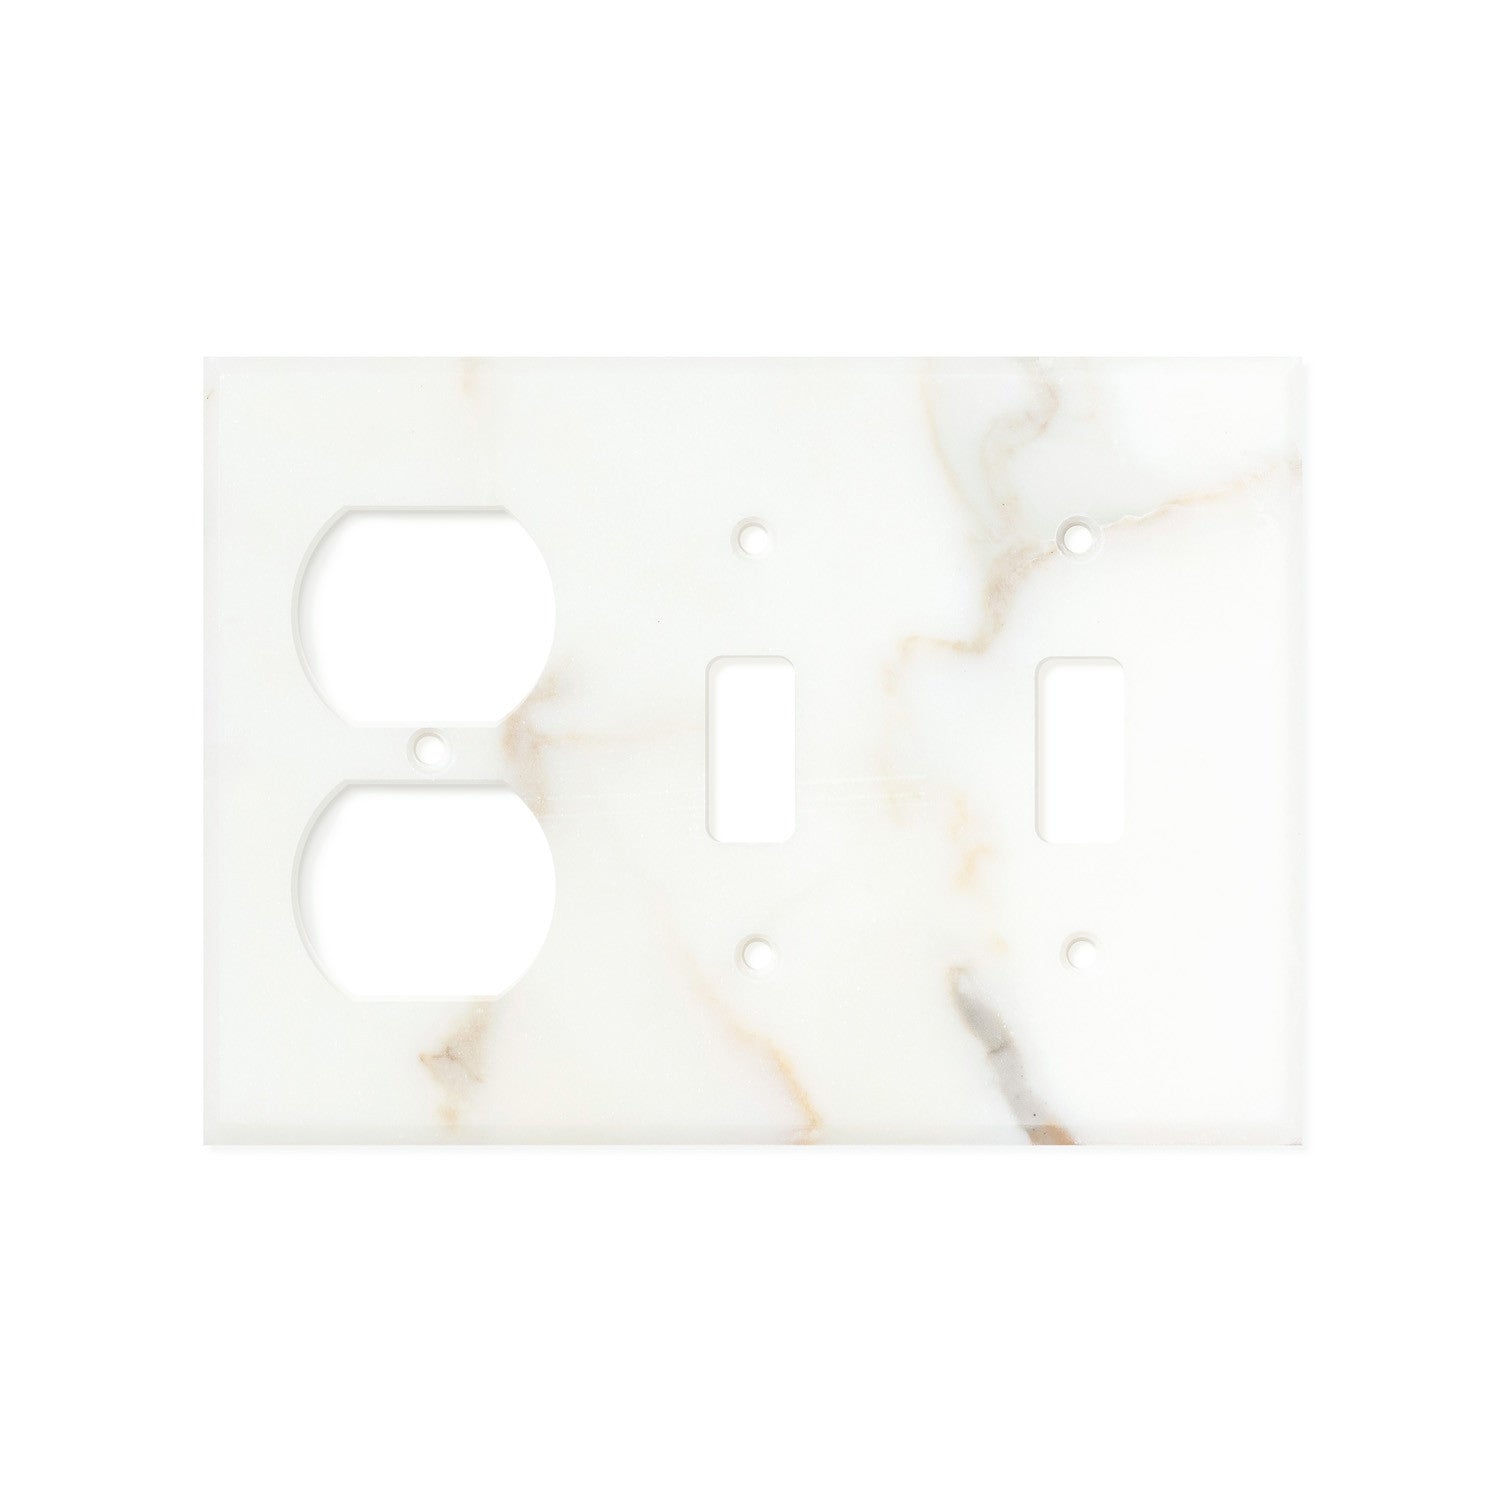 Calacatta Gold Marble Switch Plate Cover, Honed (DOUBLE TOGGLE DUPLEX) - Tilephile